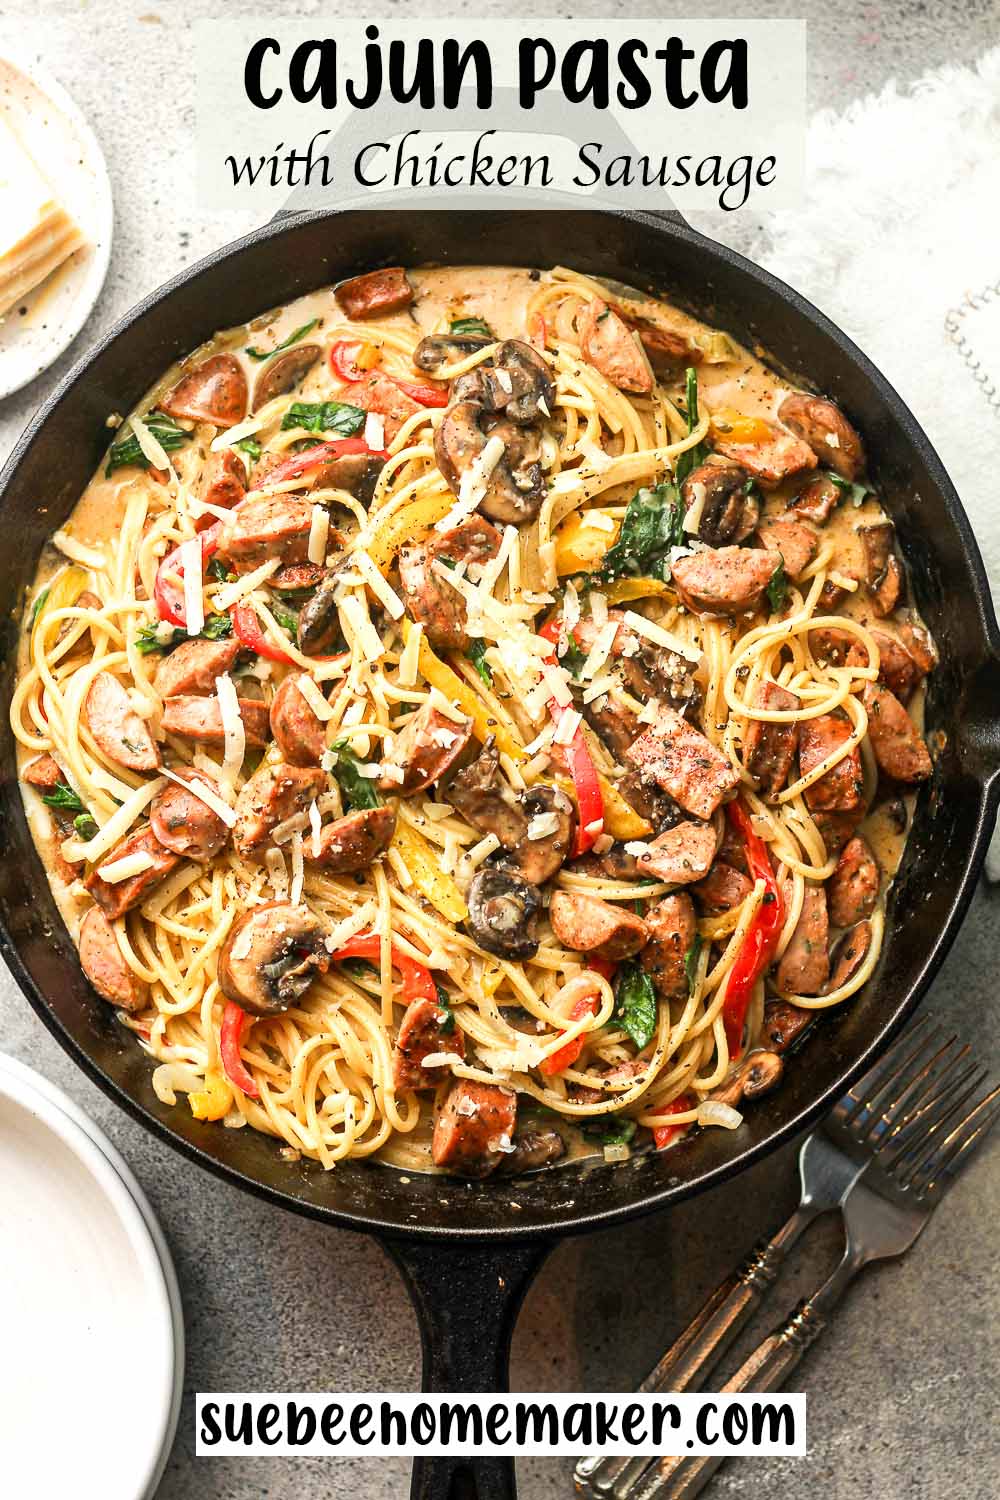 A large skillet of cajun pasta with chicken sausage.